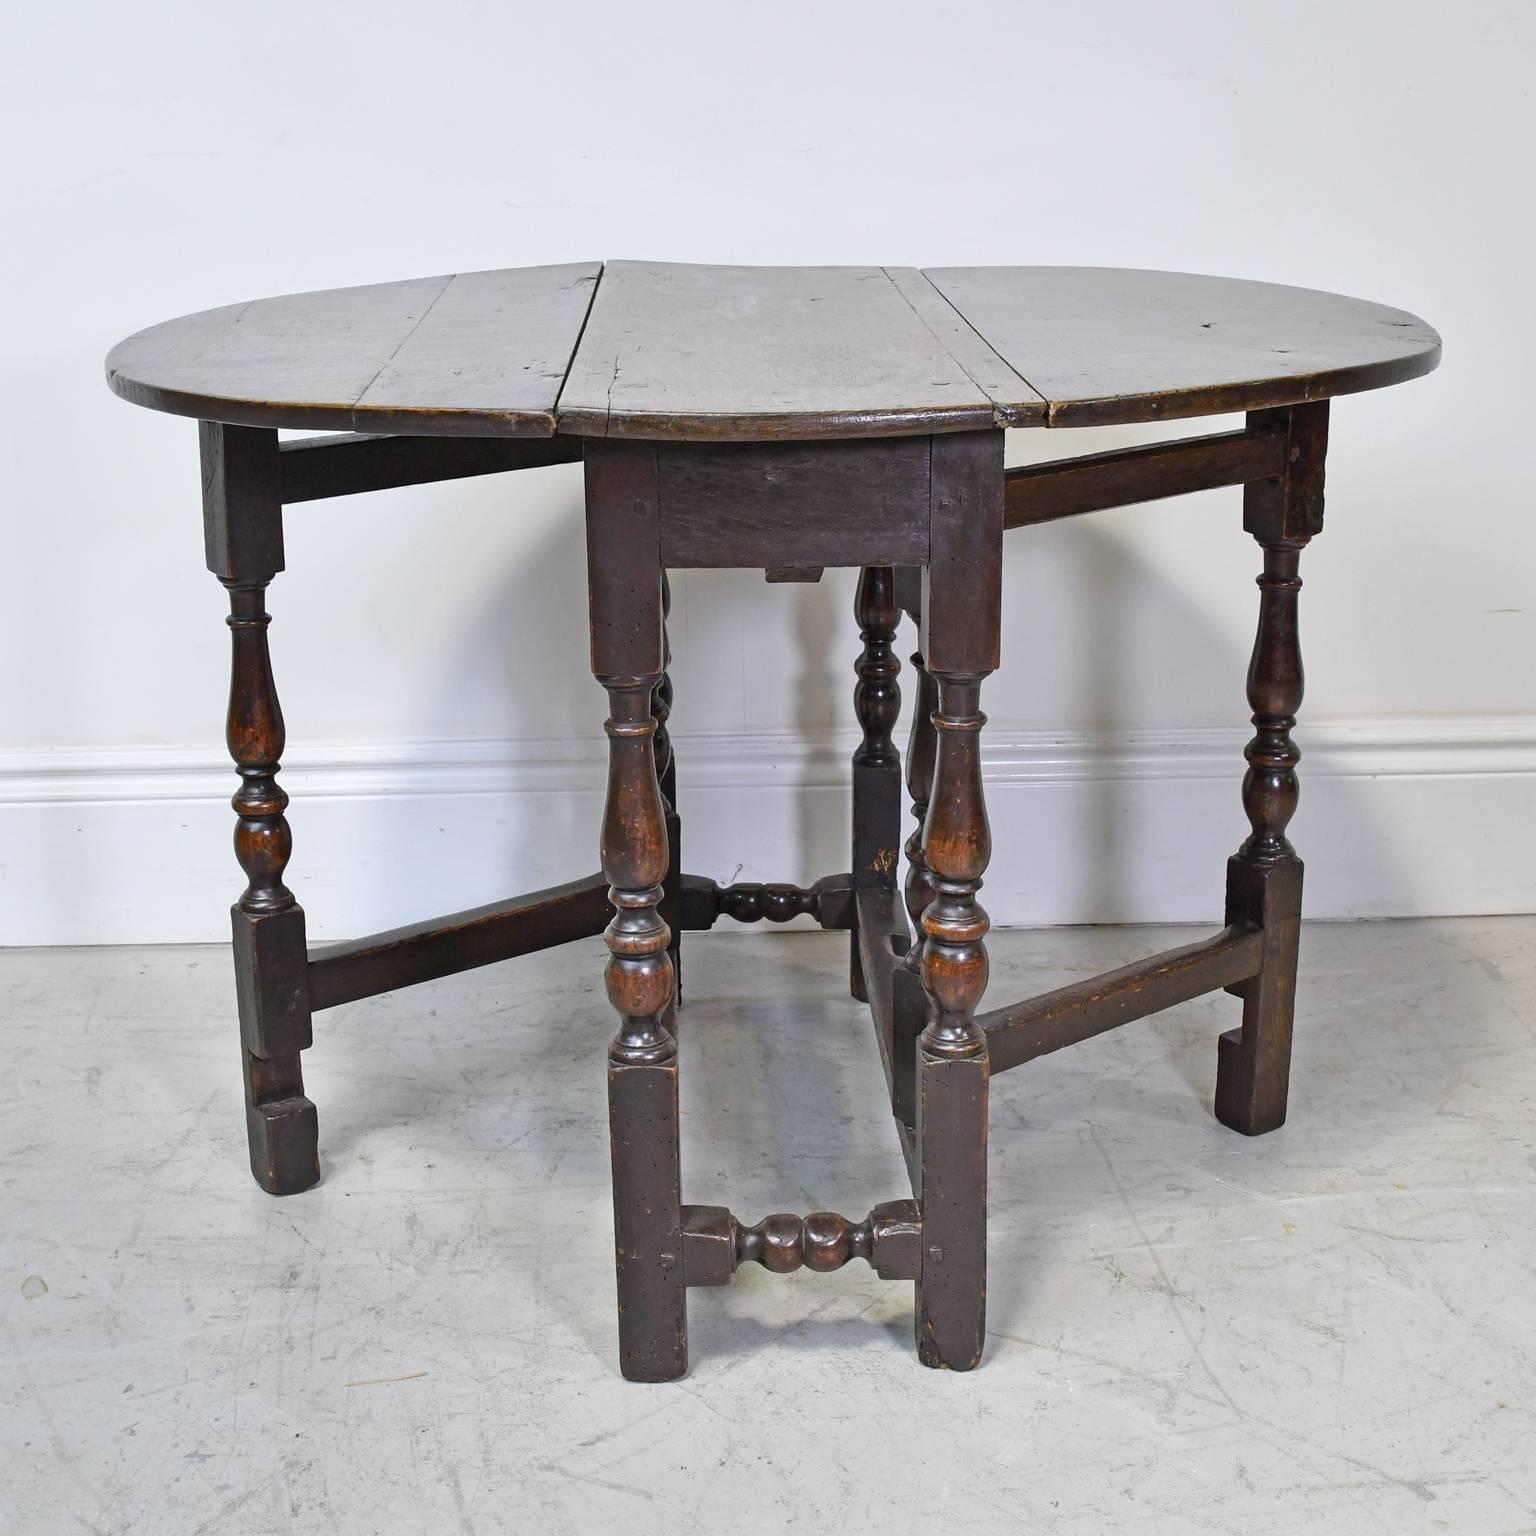 A diminutive rustic gateleg dining table in oak with drop leaves that open to a nearly round top, with turned legs that pull-out and provide support and tuck away when not in use. Scandinavian or English, circa late 1700s.
A perfect eating table for